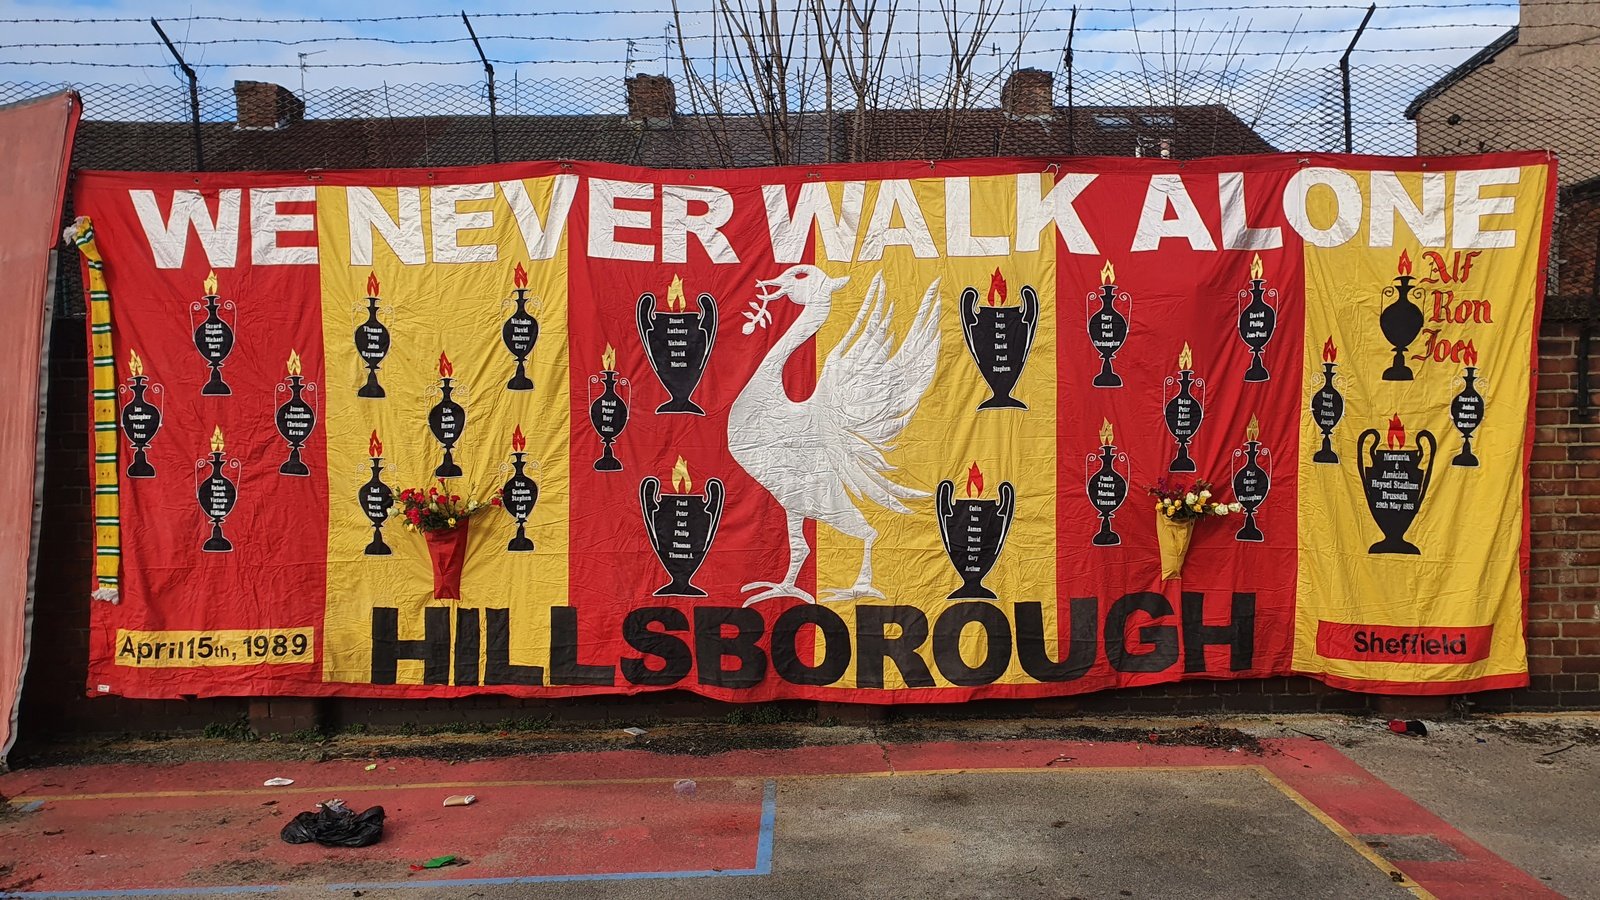 A flag commemorating the Hillsborough disaster by Peter Carney. Source: Design Museum